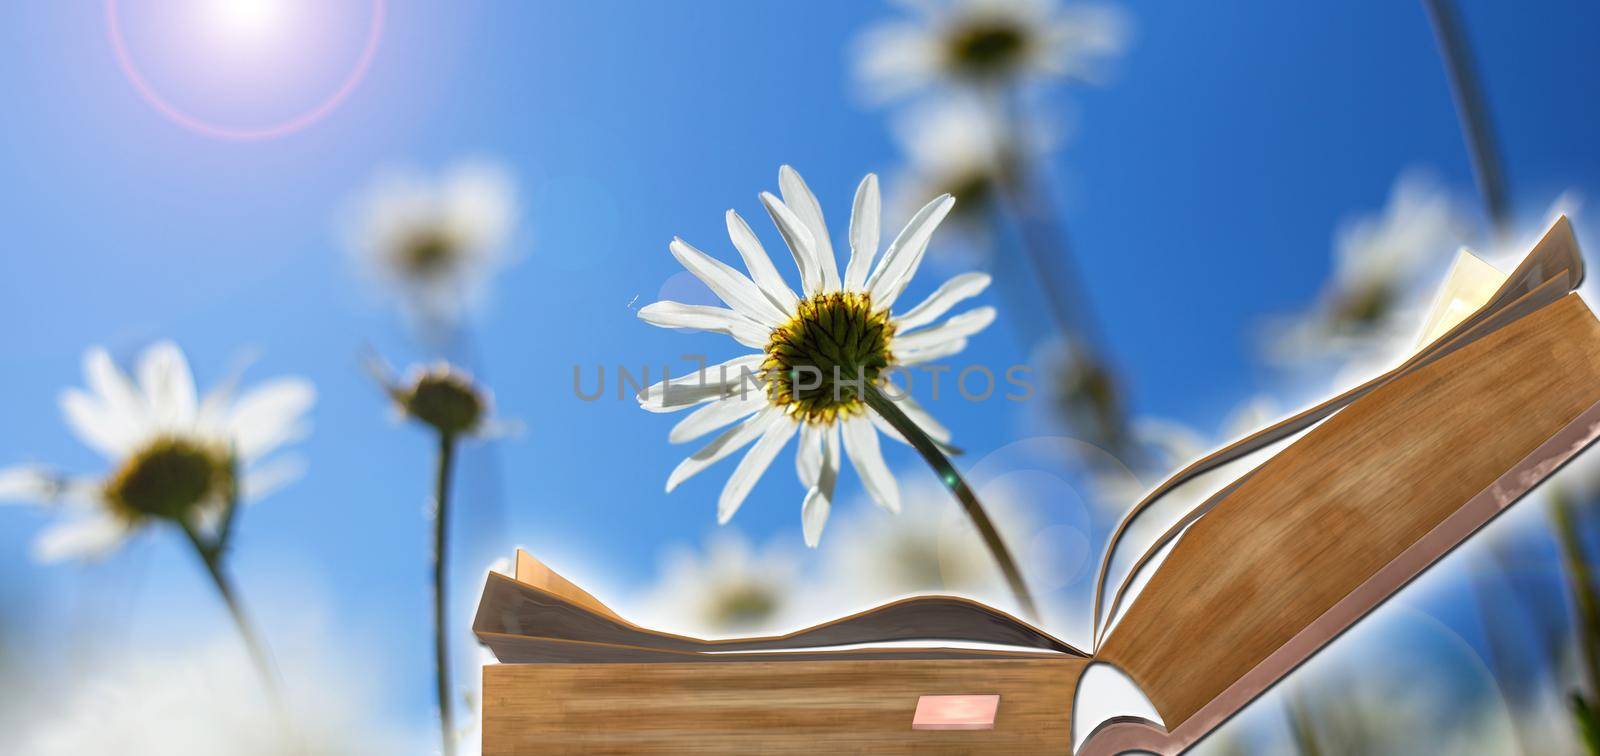 World book day. Open book on sunny field with flowers background. Book is power, source of knowledge, dream, access to wisdom concept